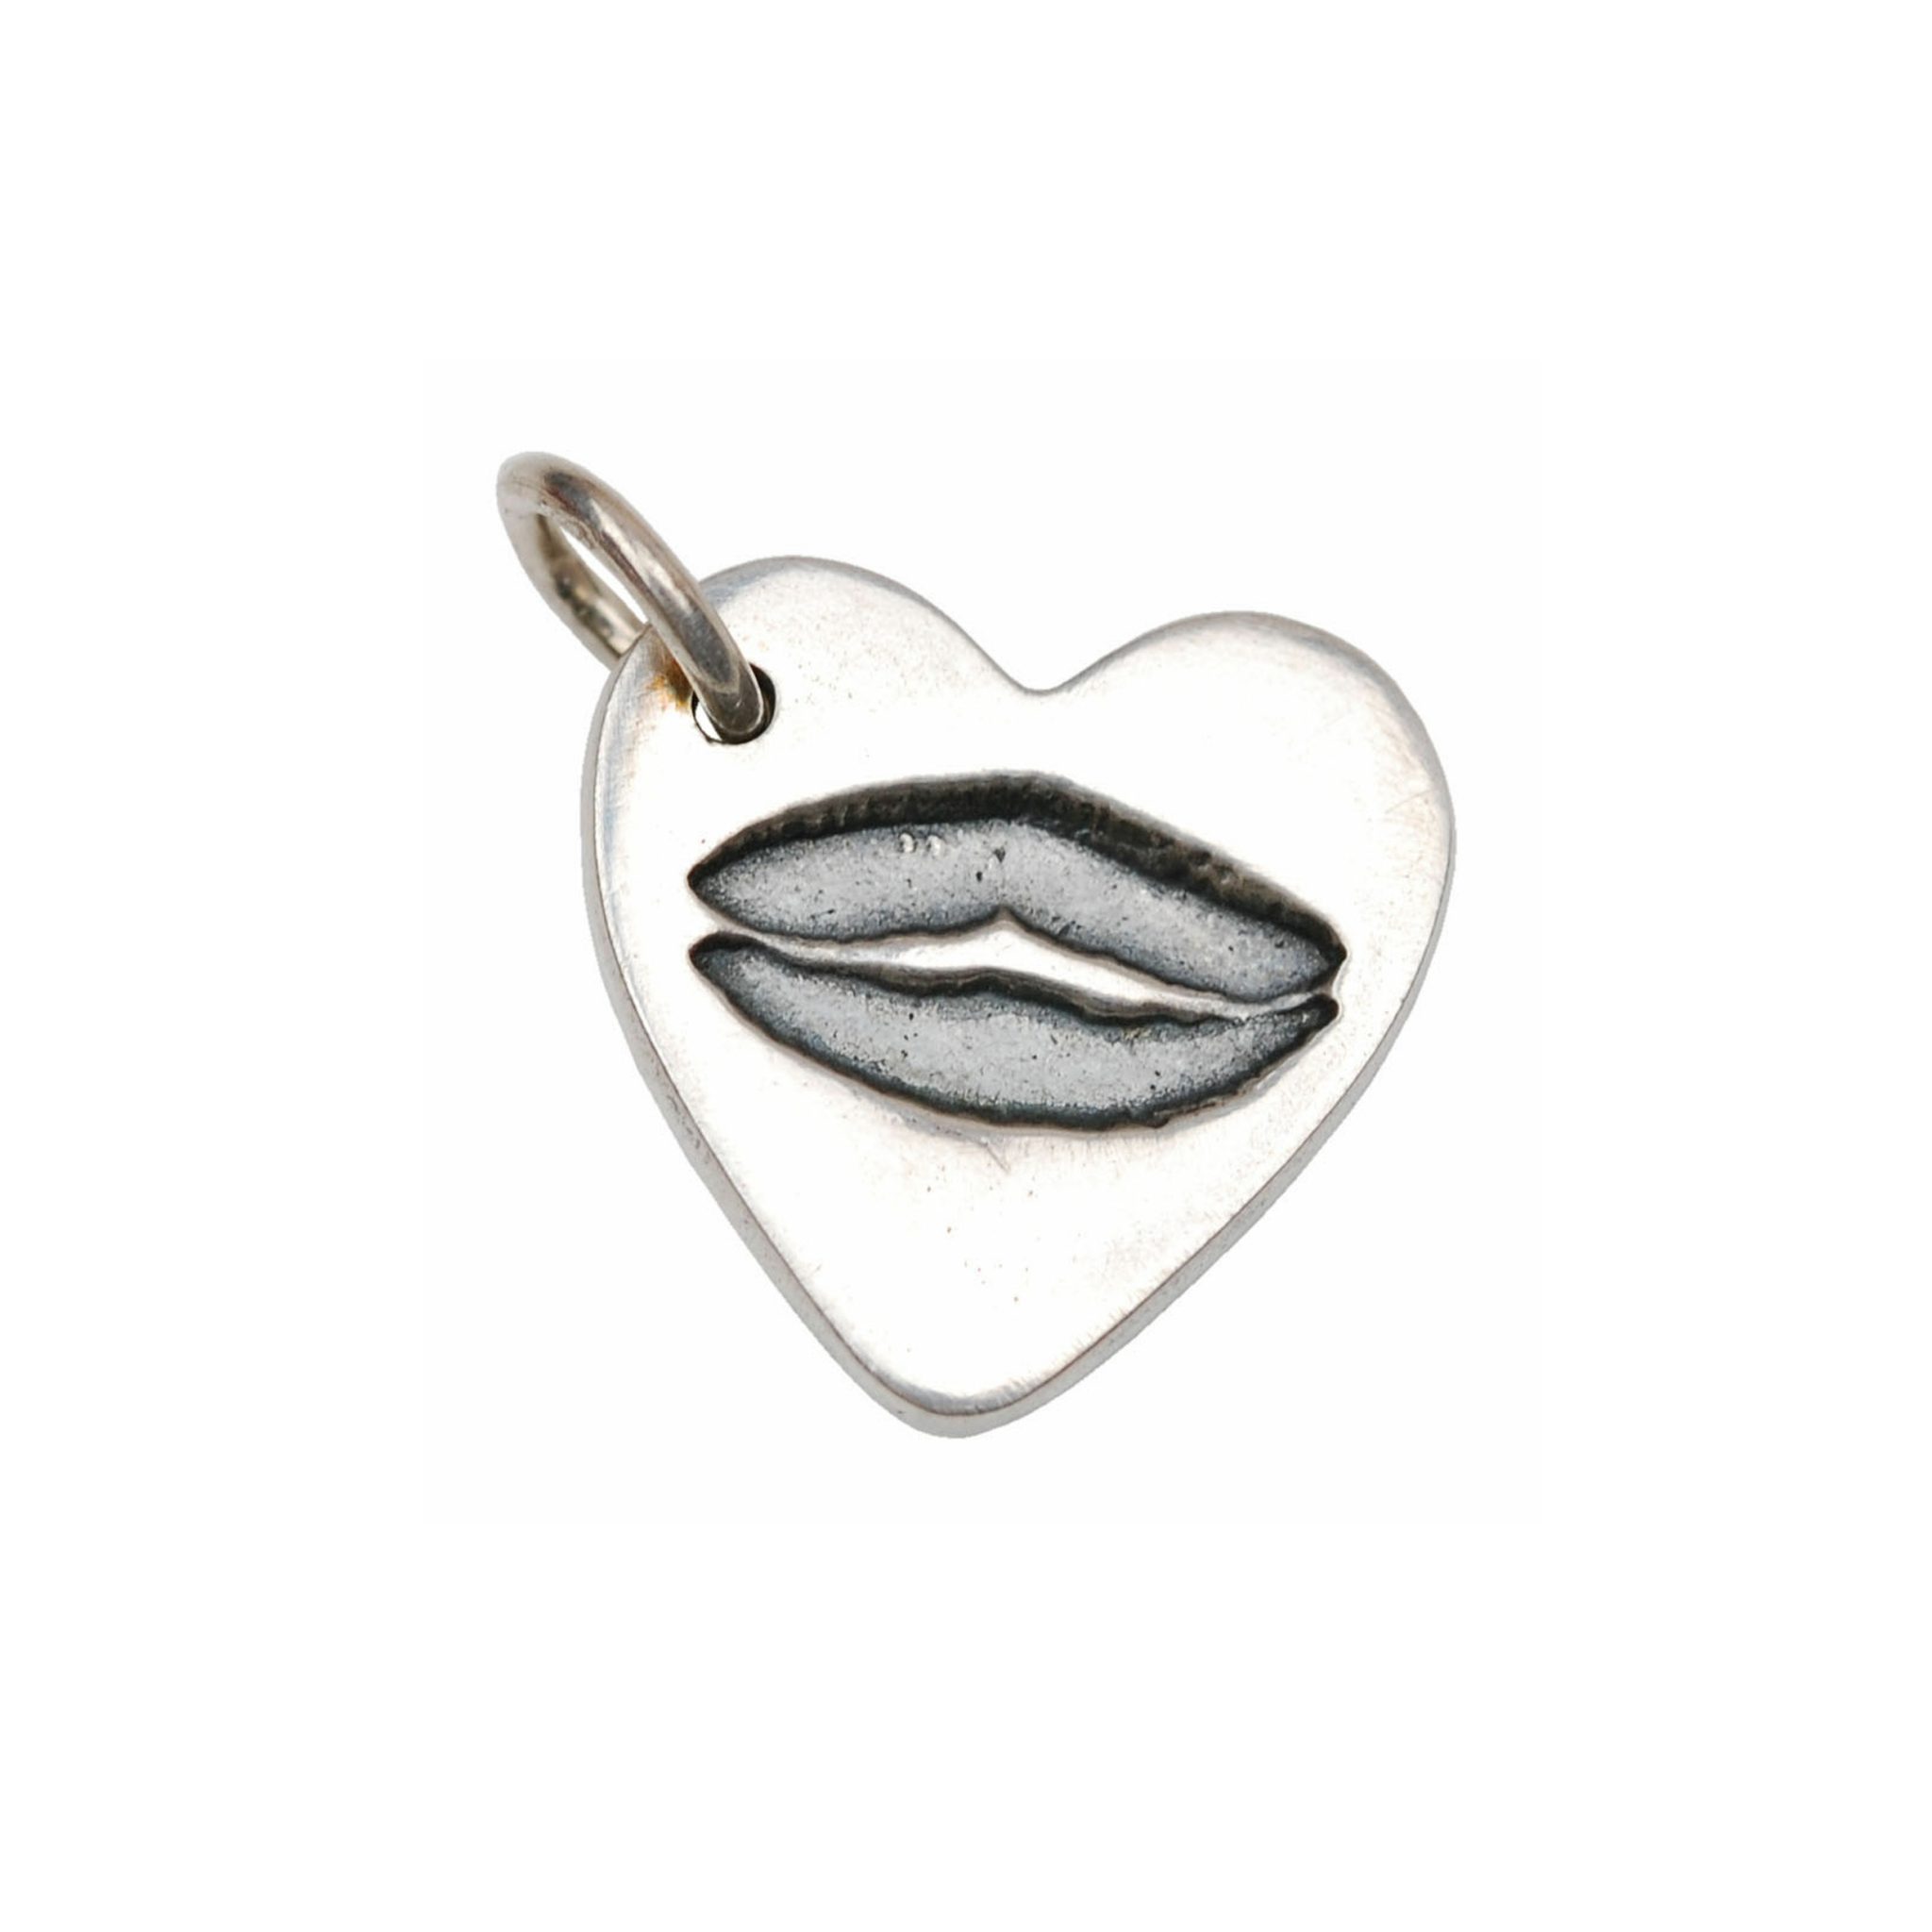 Small silver charm with your loved one's kiss imprint